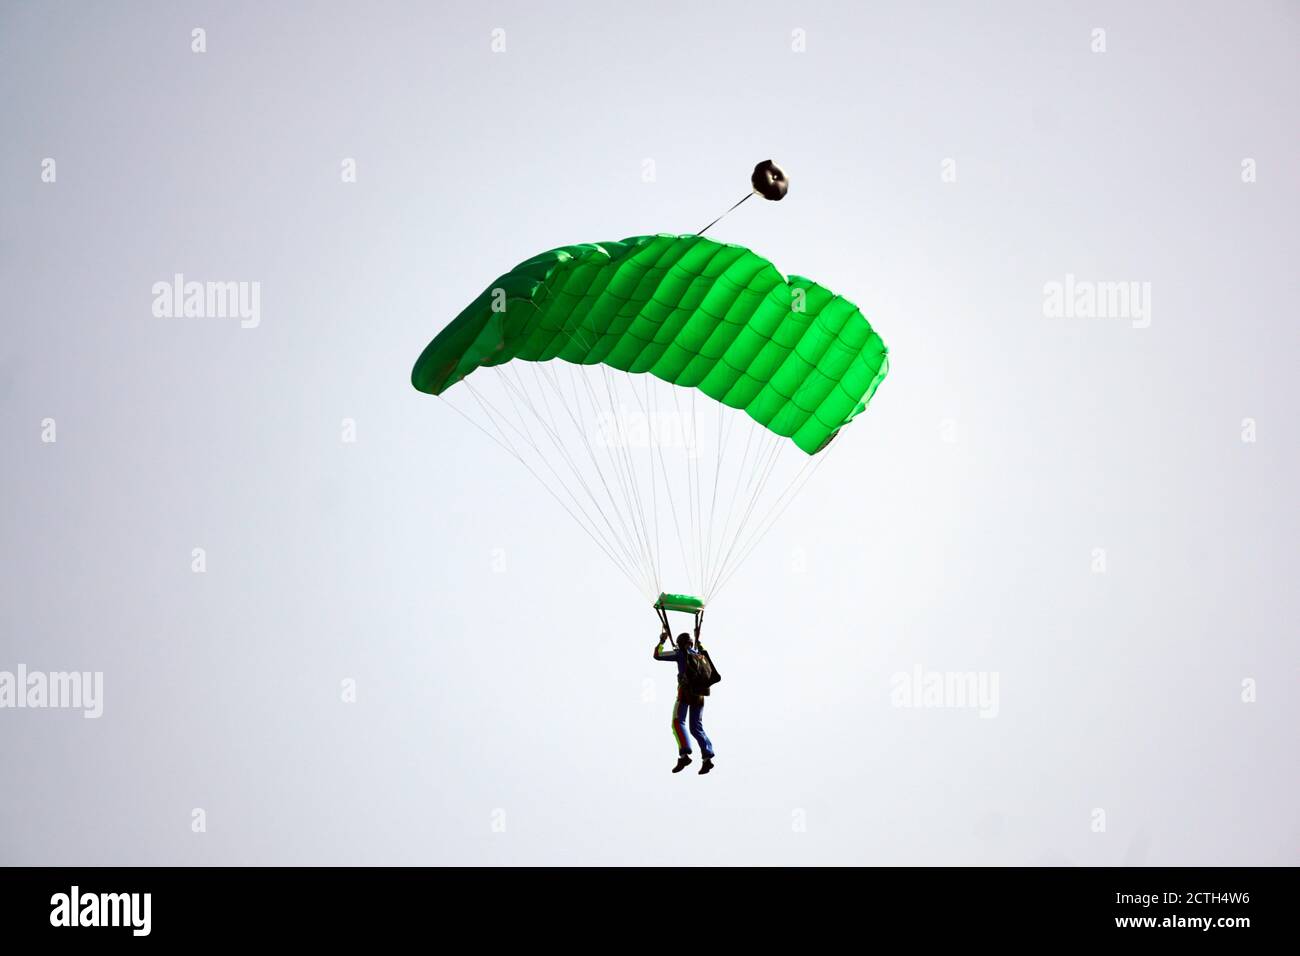 Single parachutist jumped from an air-plane uses a parachute to land. Simple concept with copy space photograph. Stock Photo